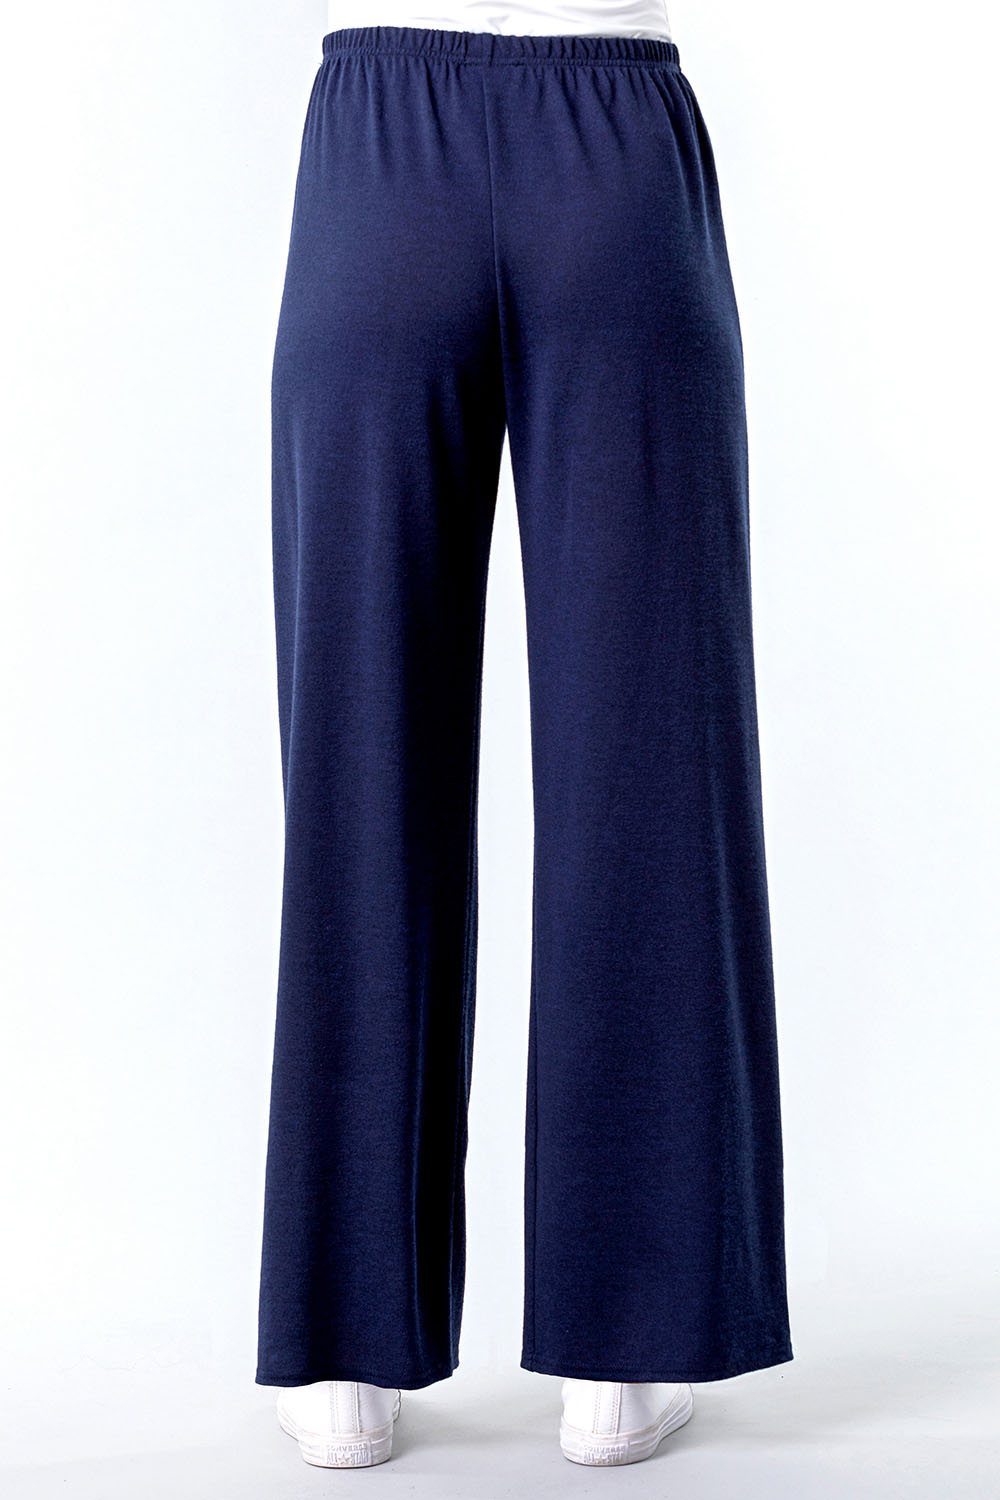 Navy  Wide Leg Lounge Trousers, Image 2 of 4